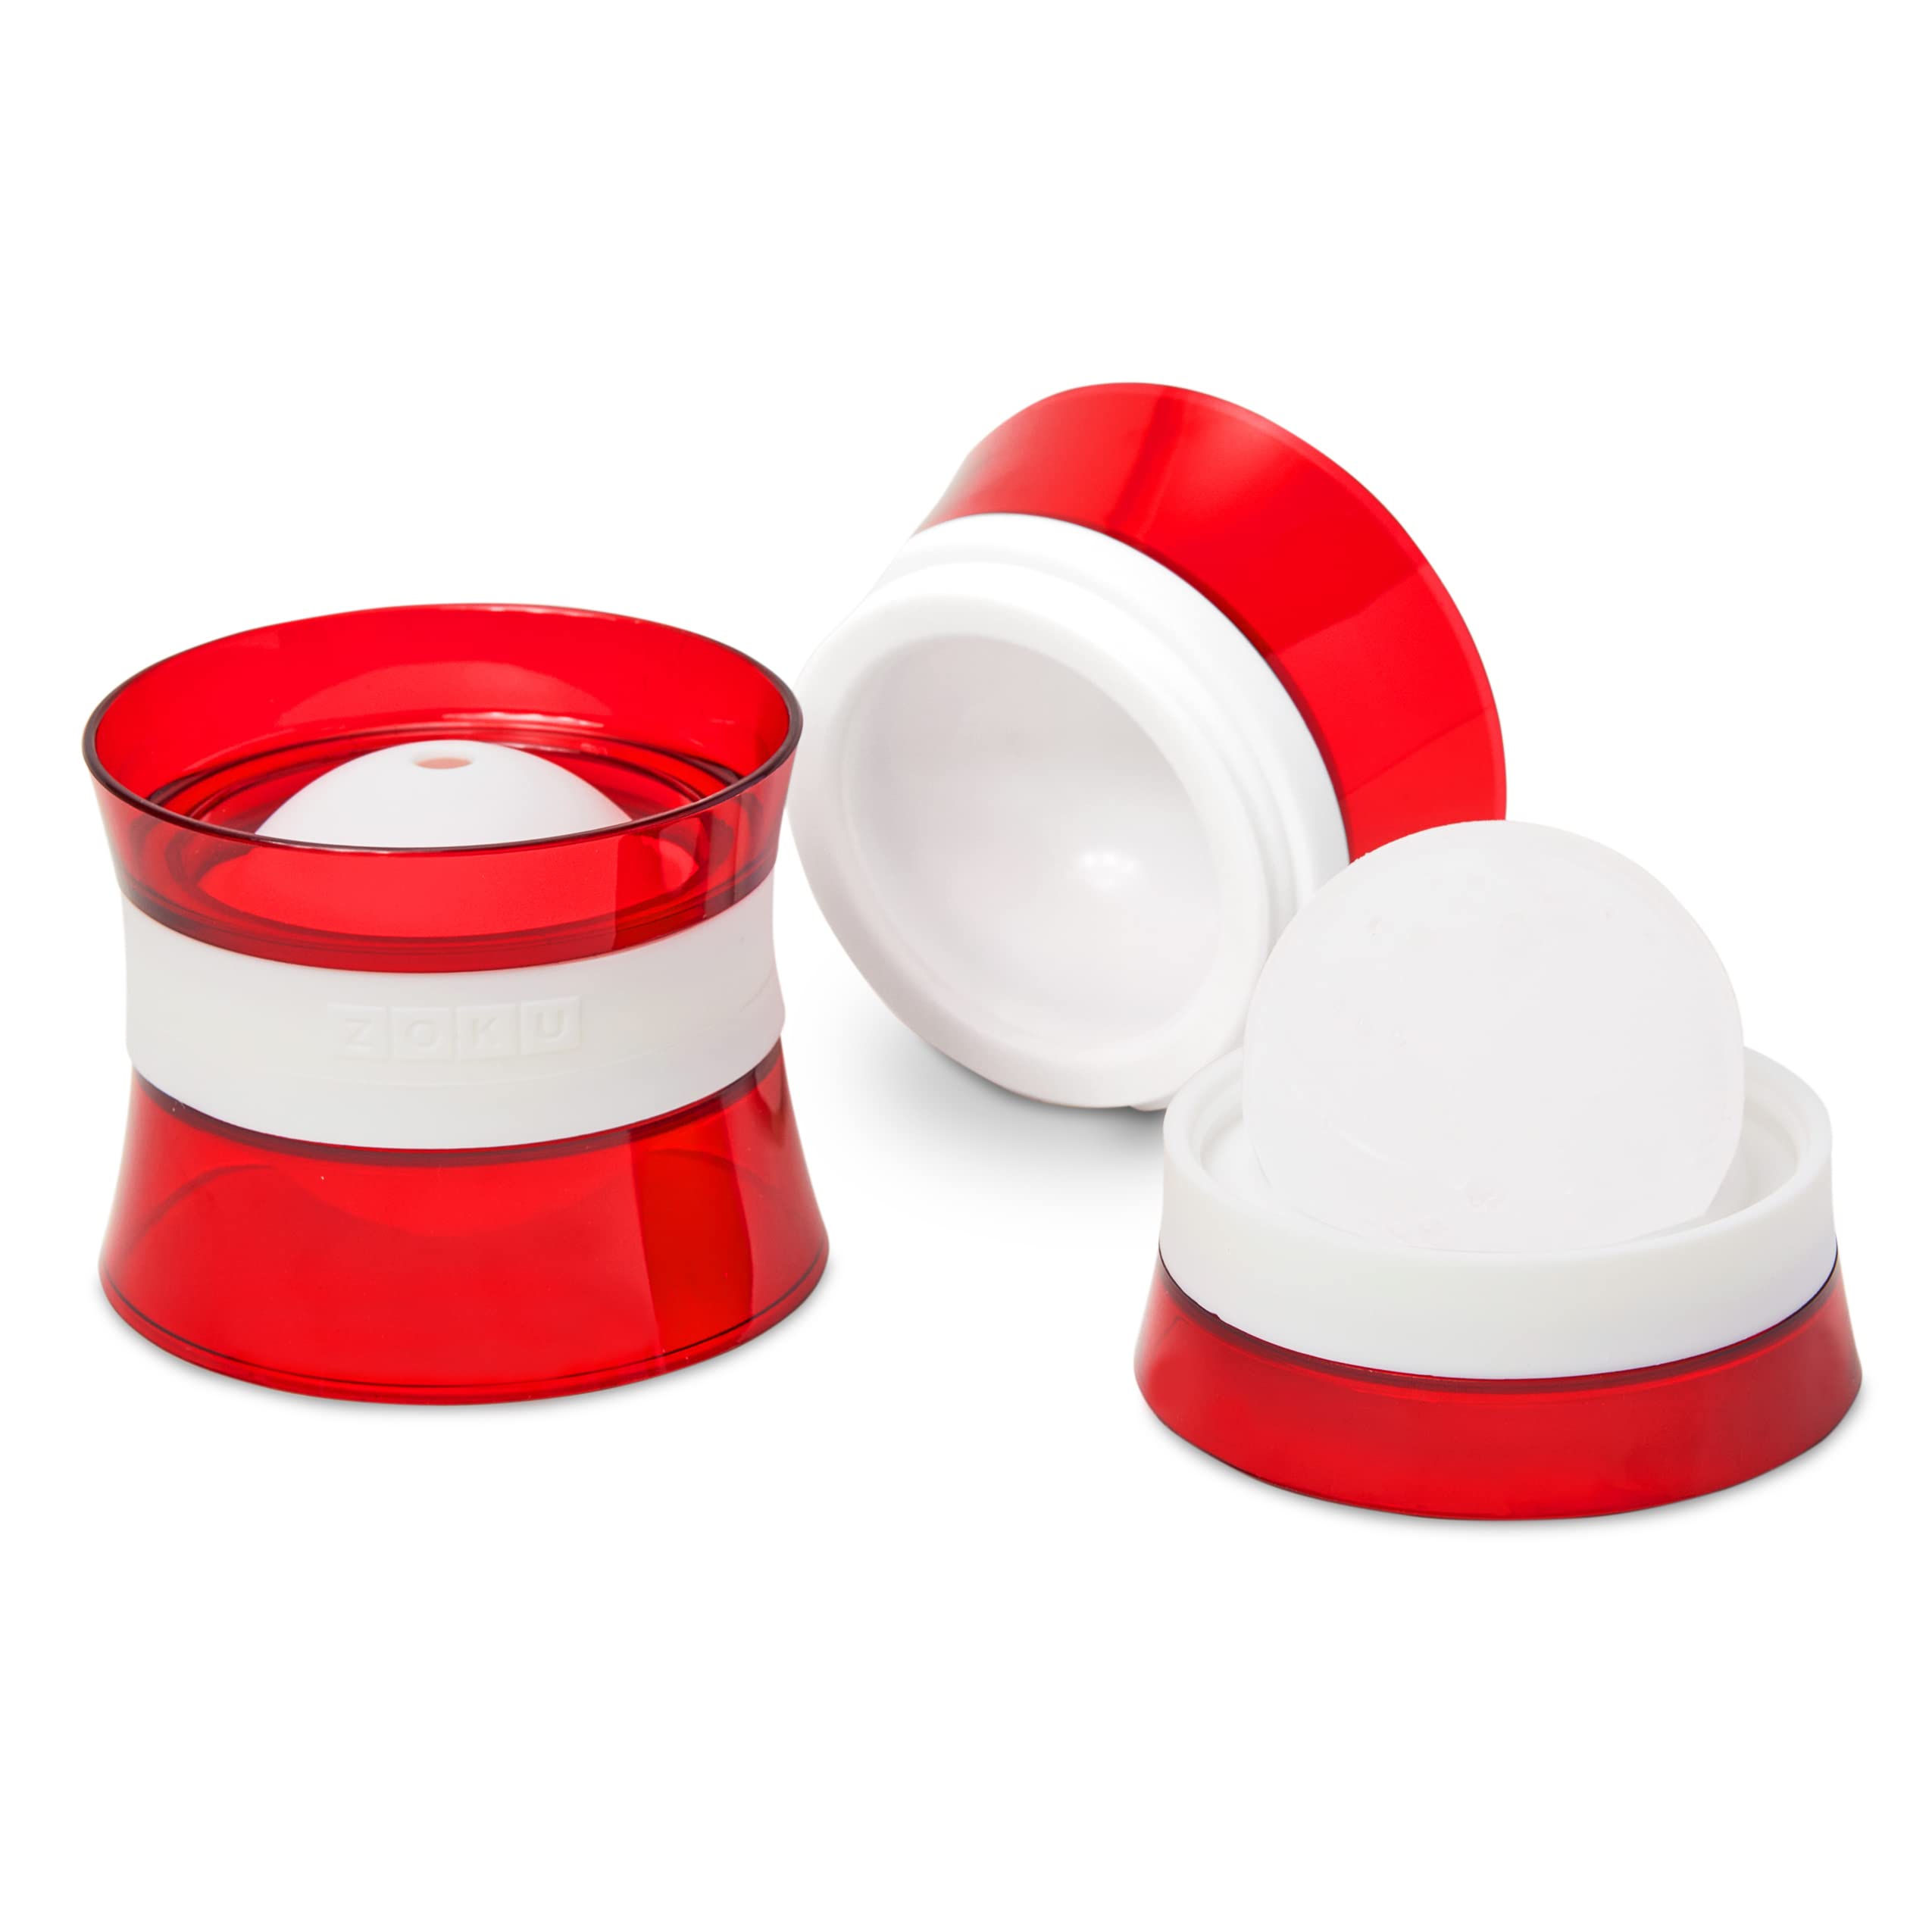 Zoku Set of 2 Silicone Sphere Ice Molds, Stackable